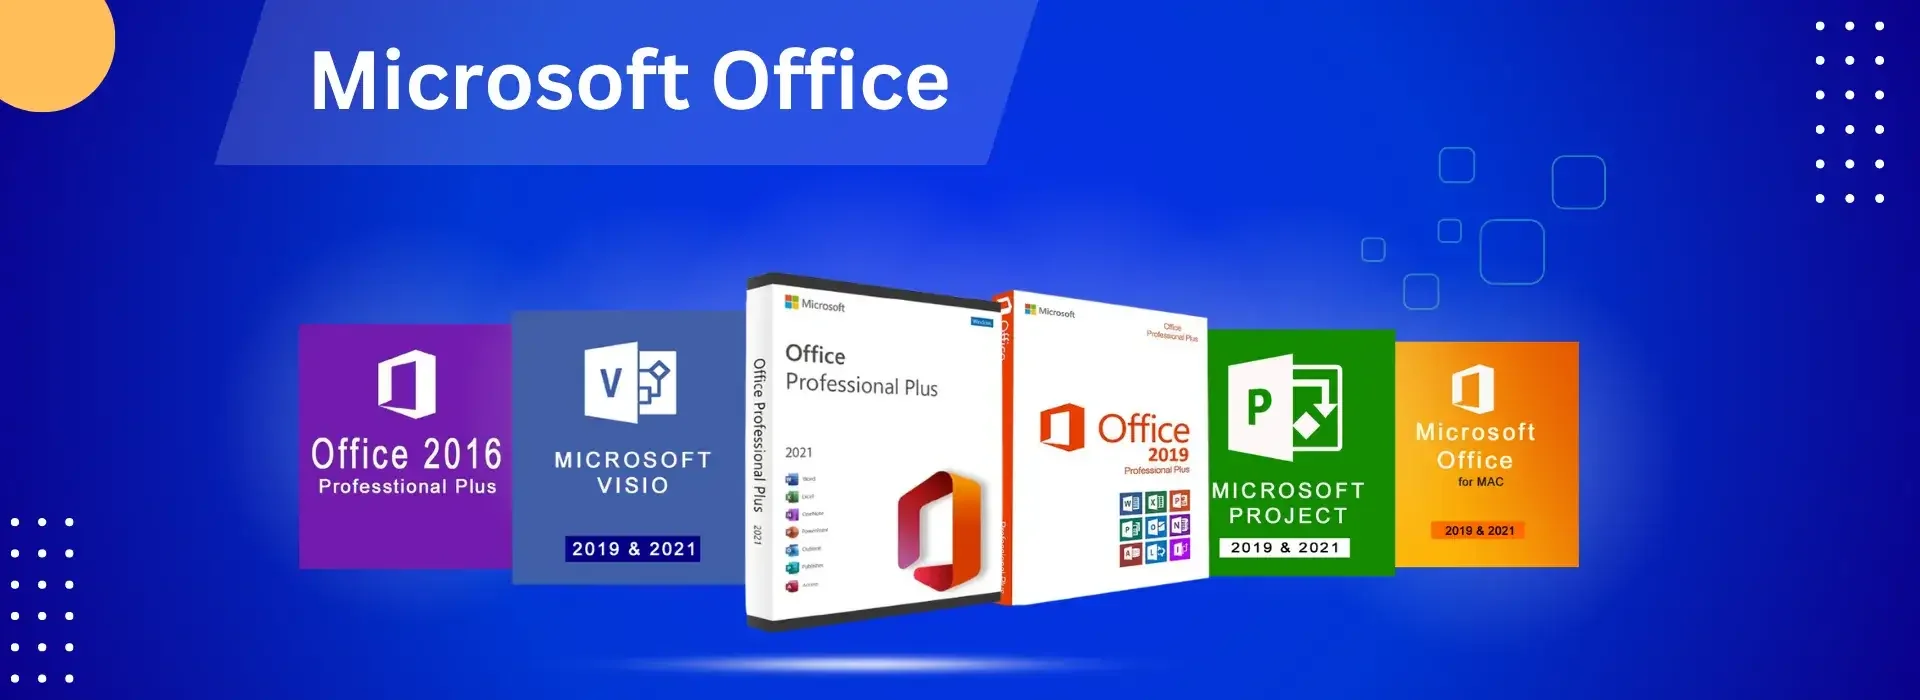 MS Office banner